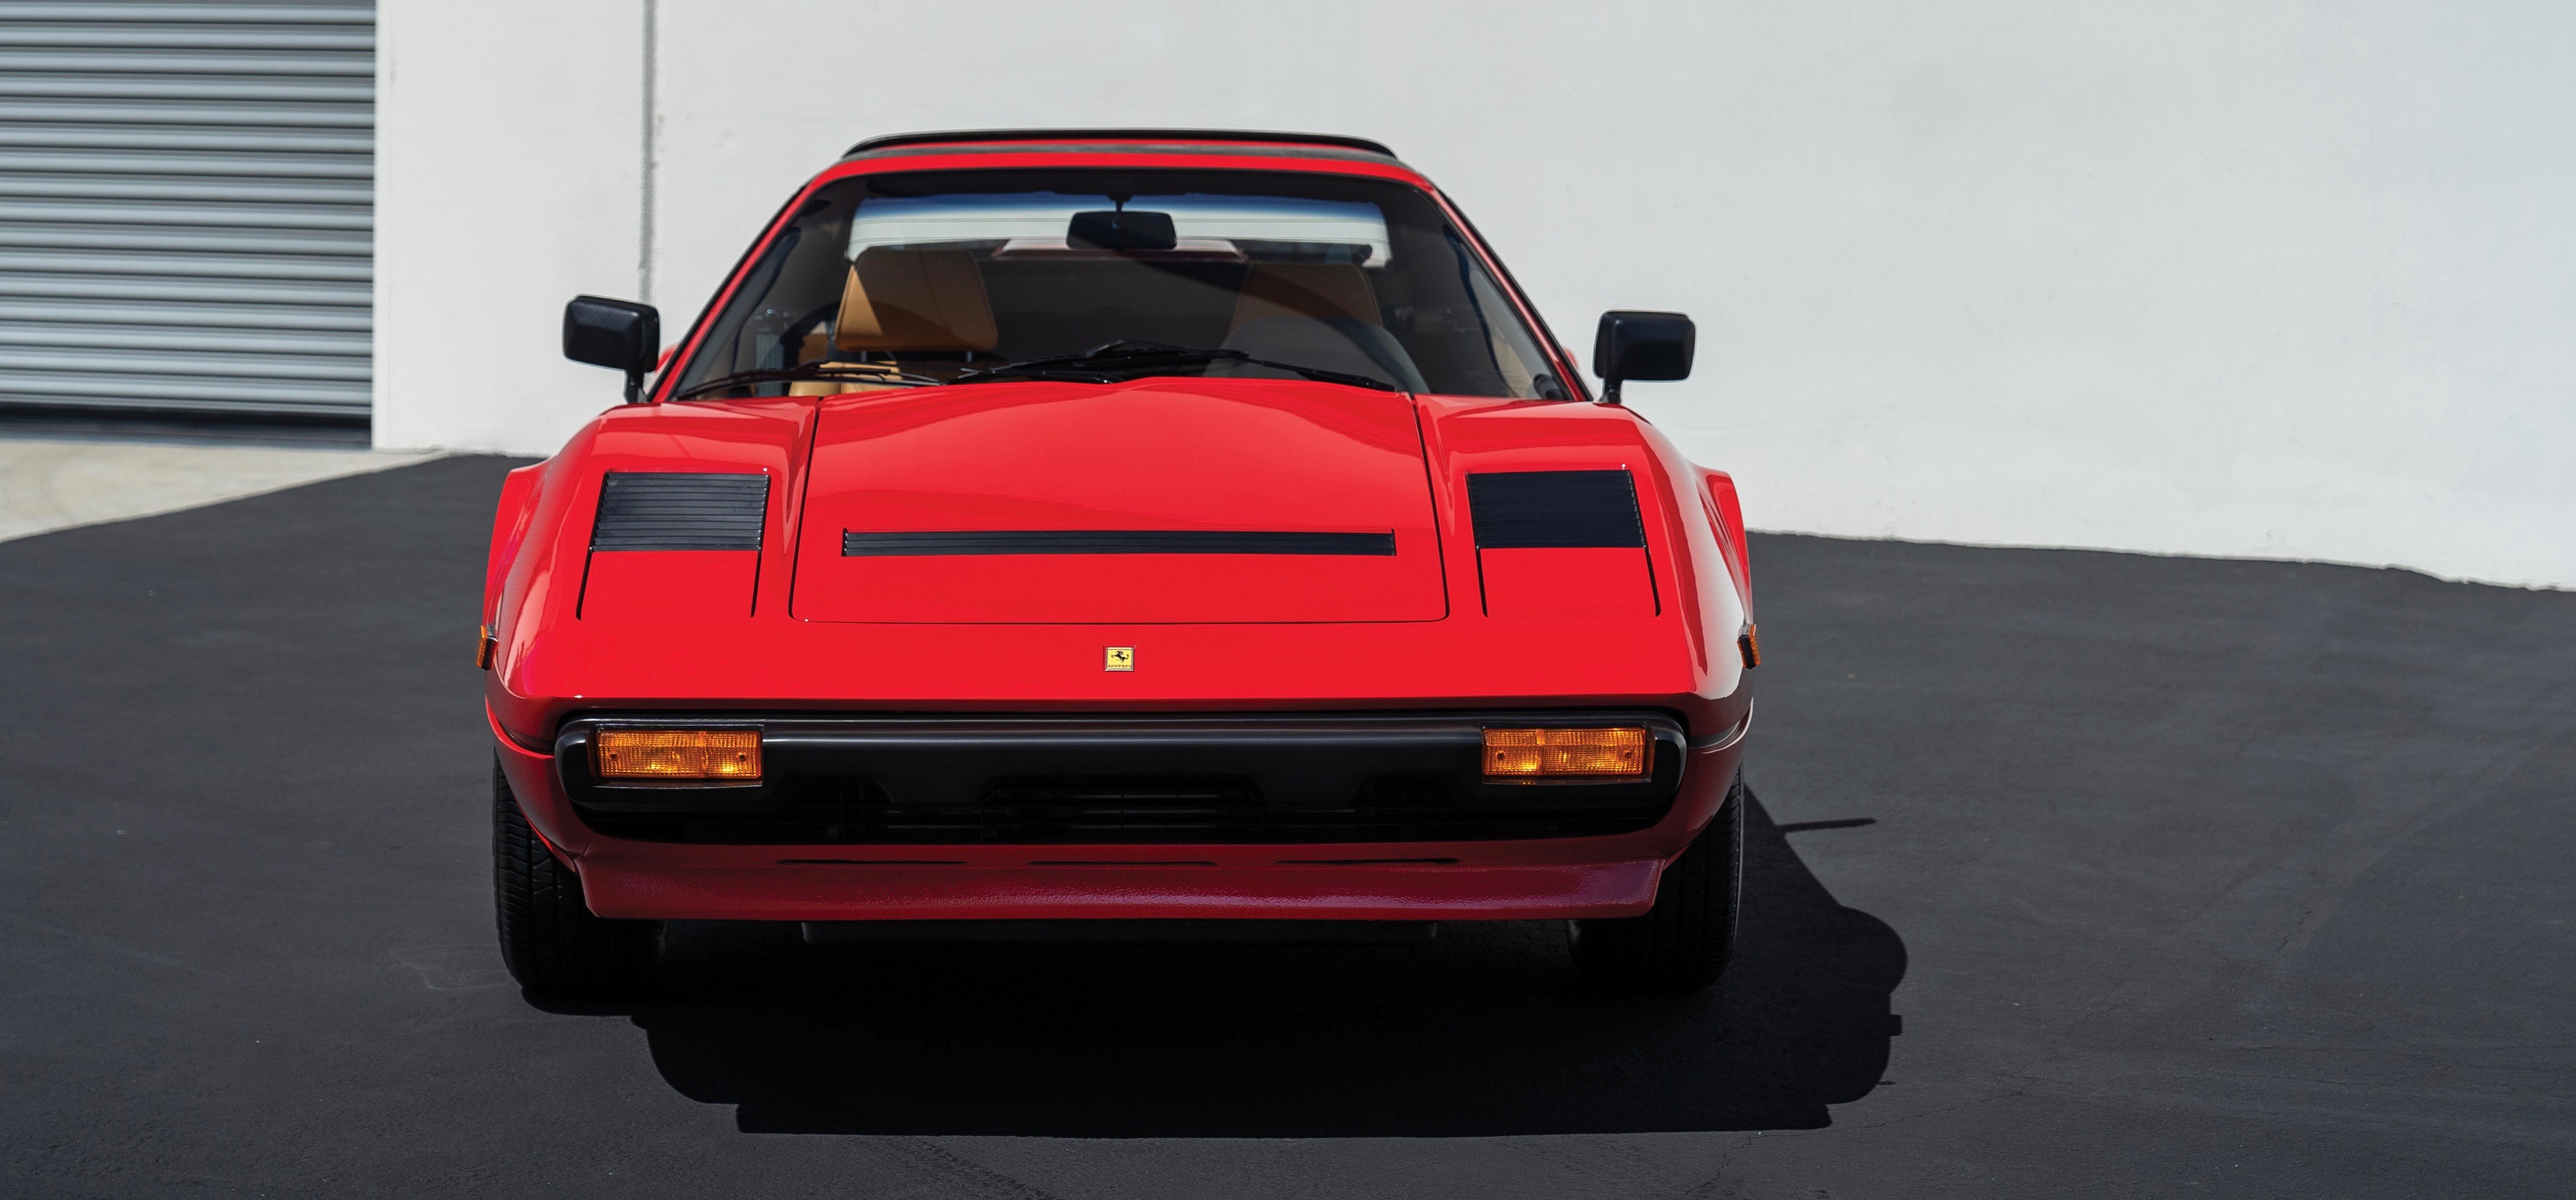 Ming Collection, 7 ‘as new’ Ming Collection Ferraris spice RM Sotheby’s Monterey auction docket, ClassicCars.com Journal